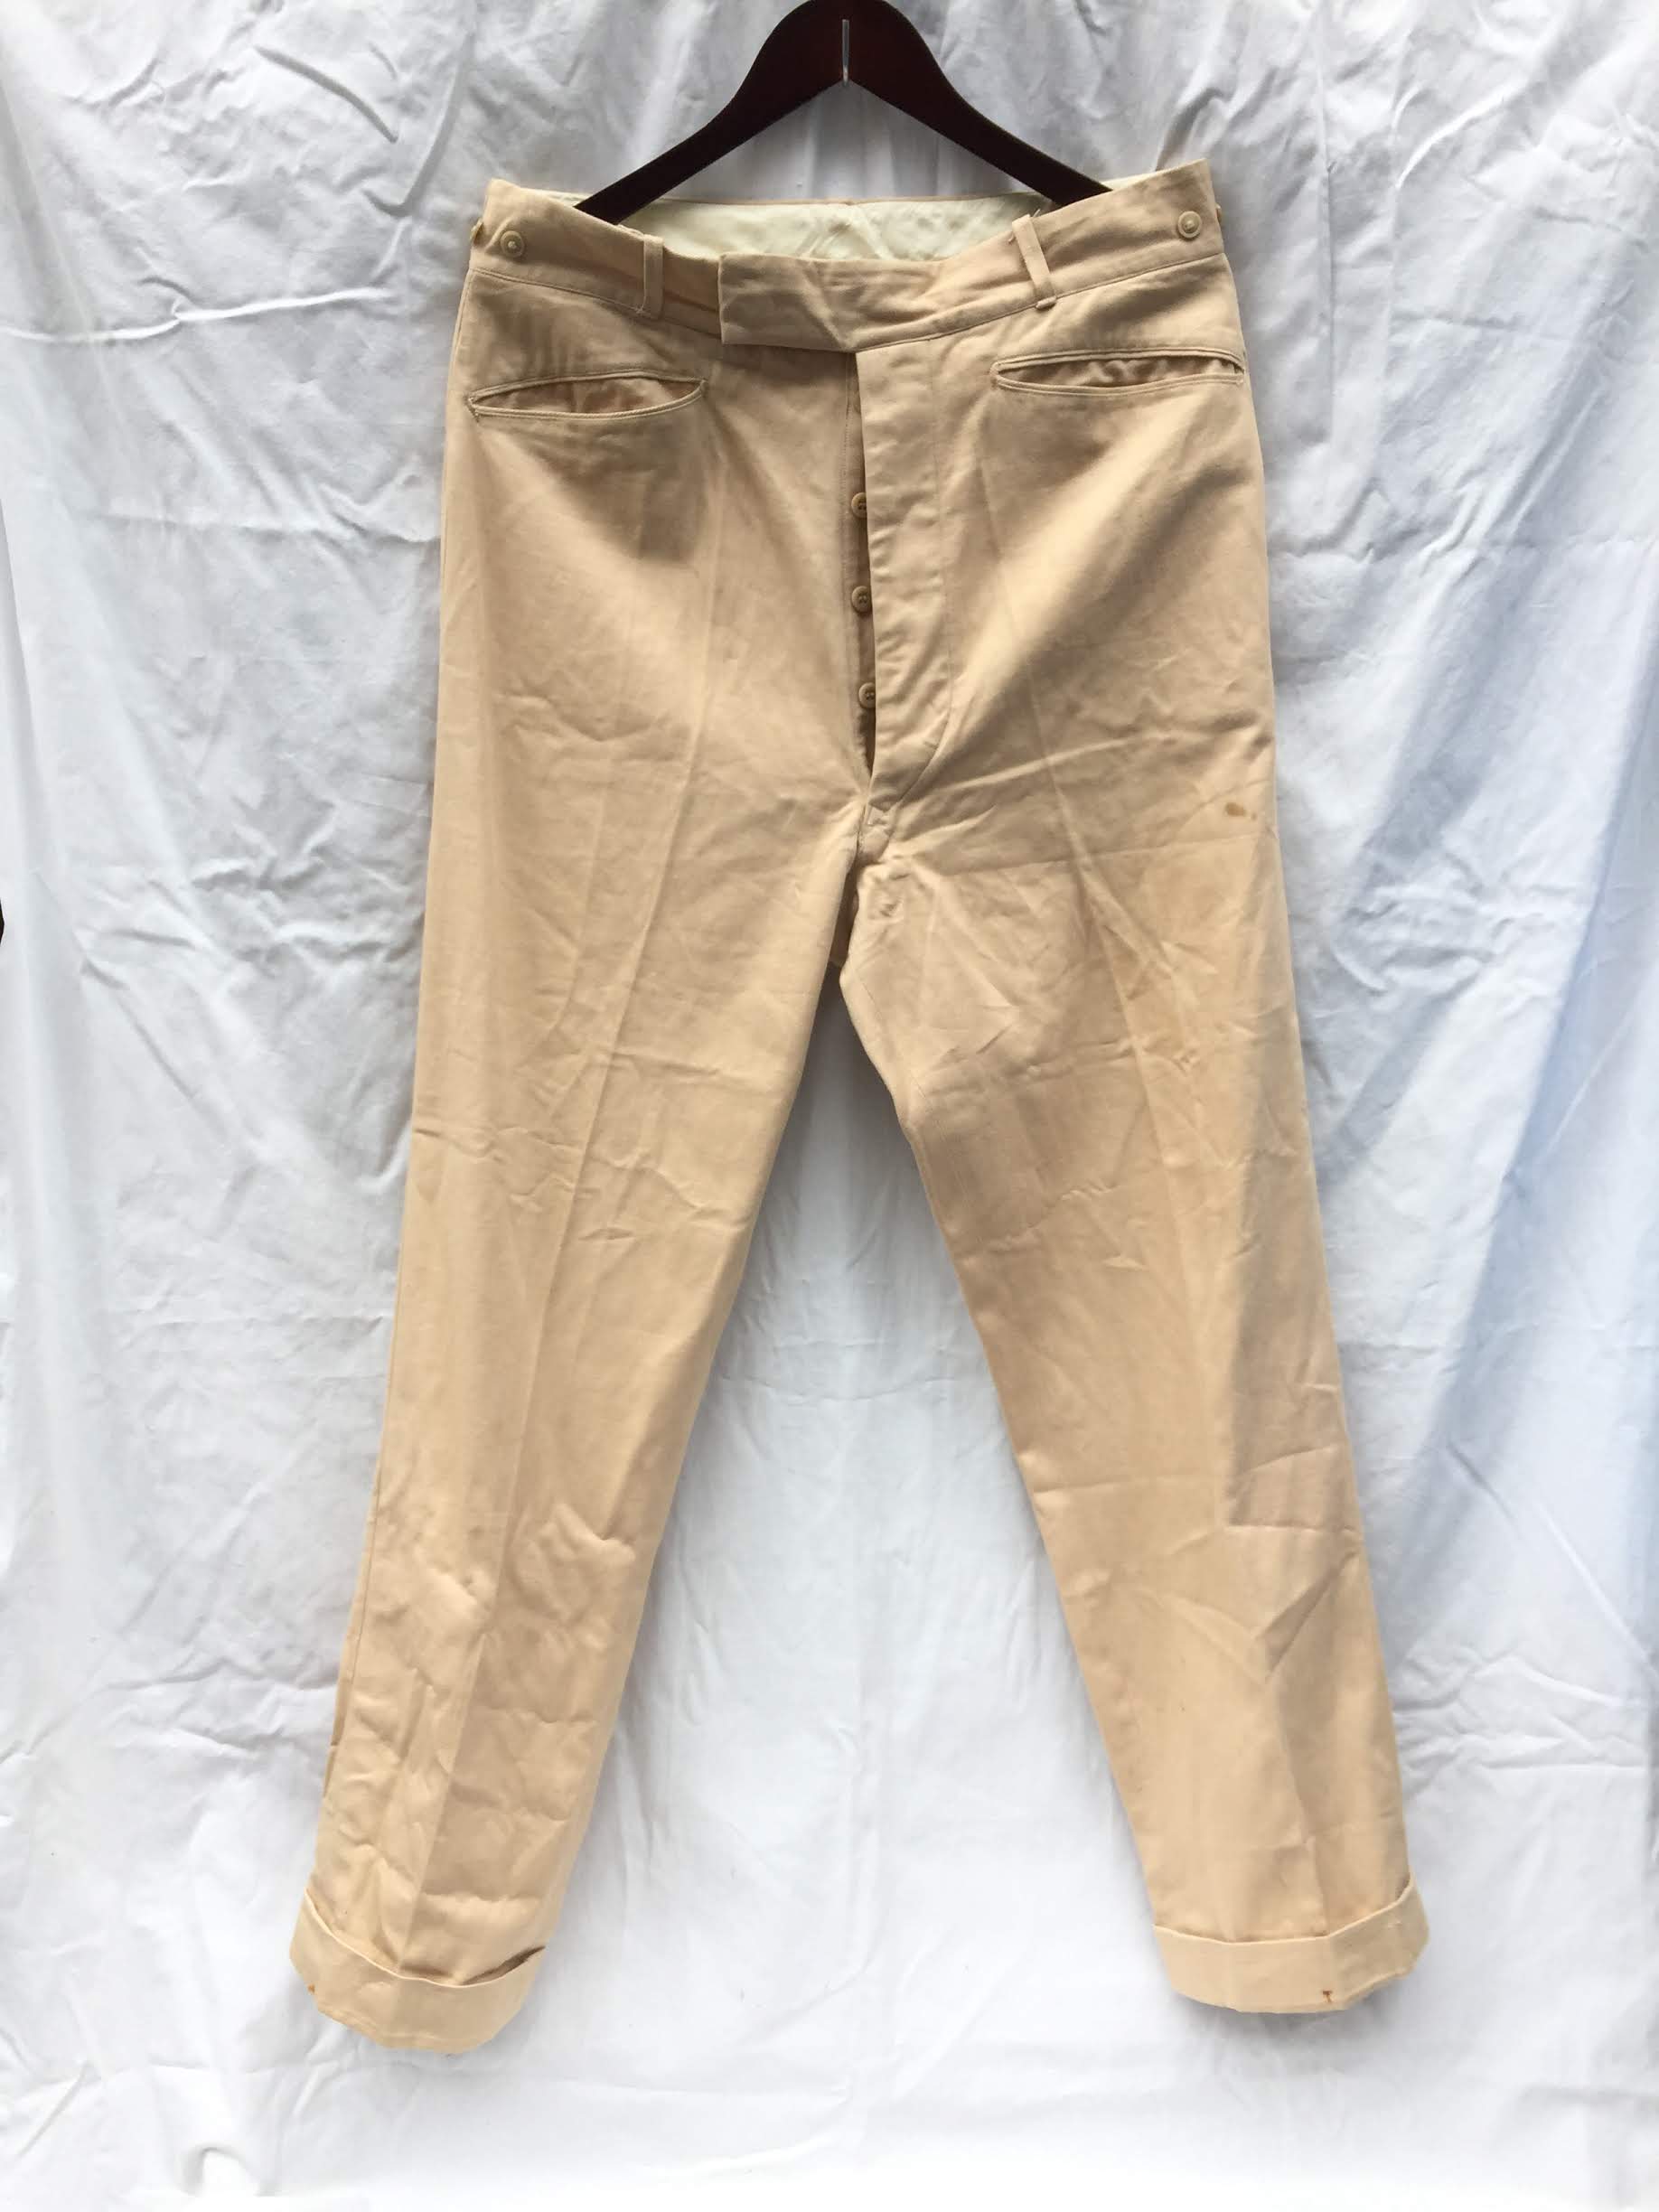 40-50's Vintage Harrods Drill Trousers Mint Condition